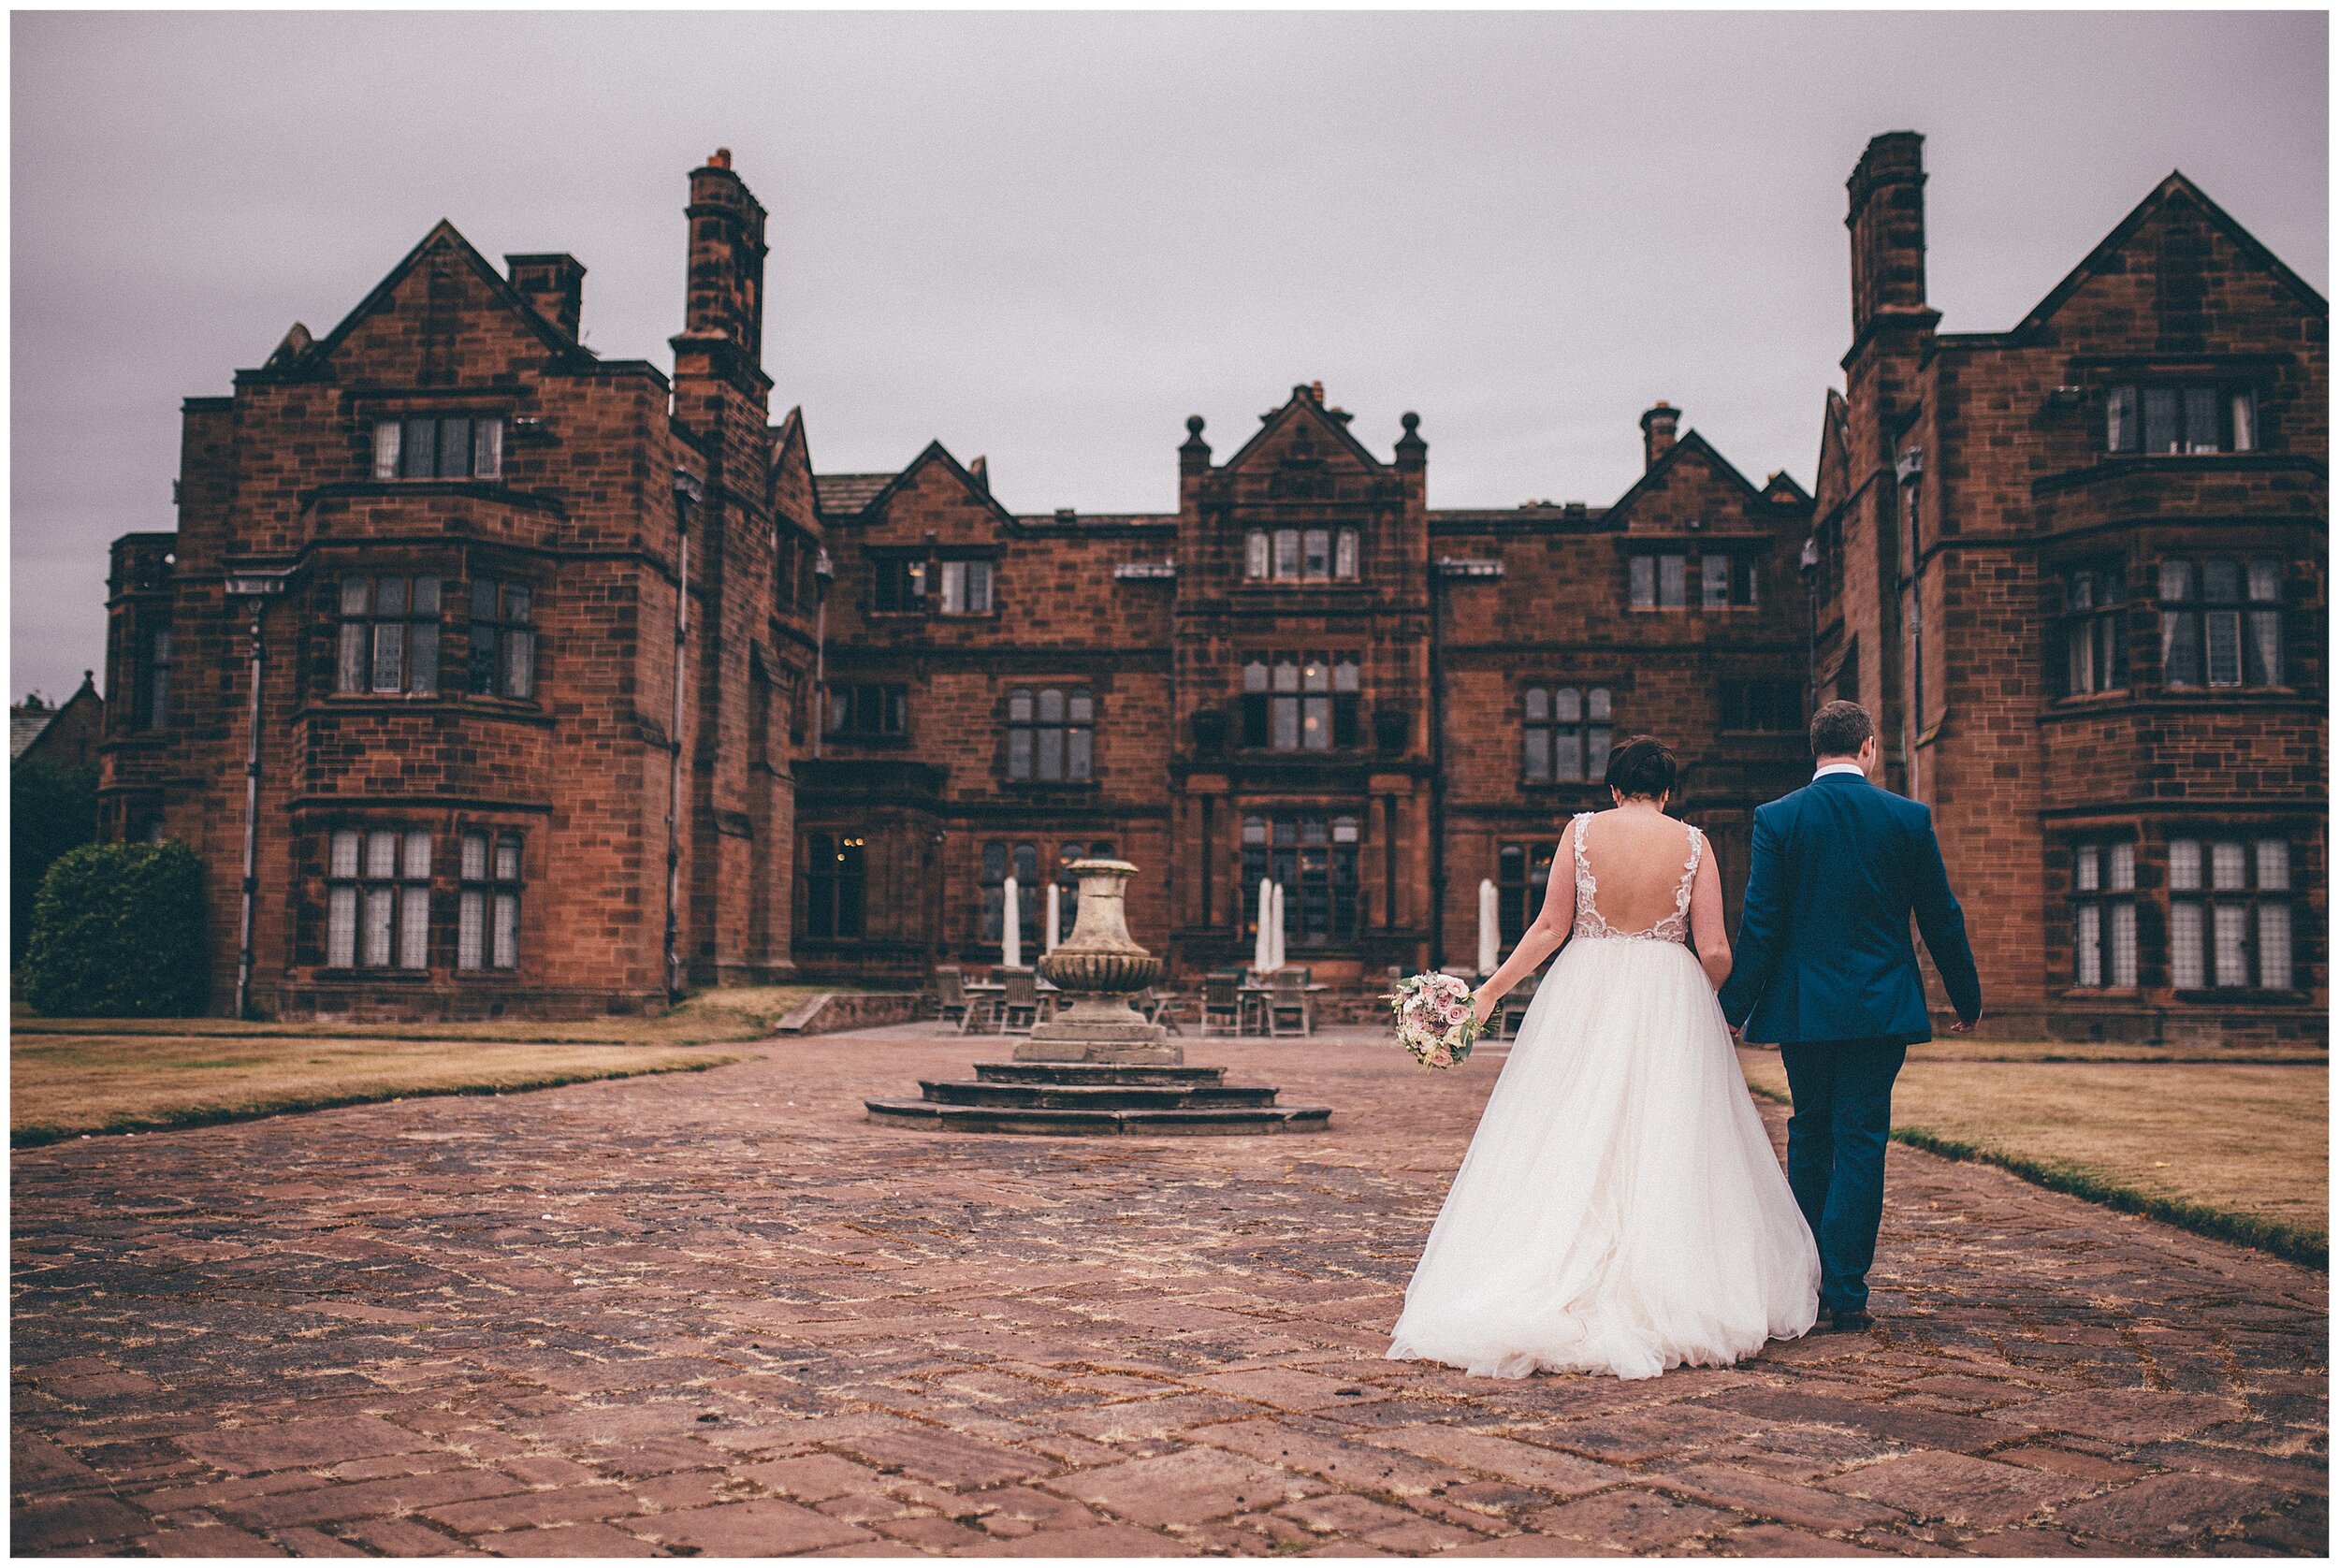 Couple portraits at Cheshire wedding venue, by wirral wedding photographer at Thornton Manor.